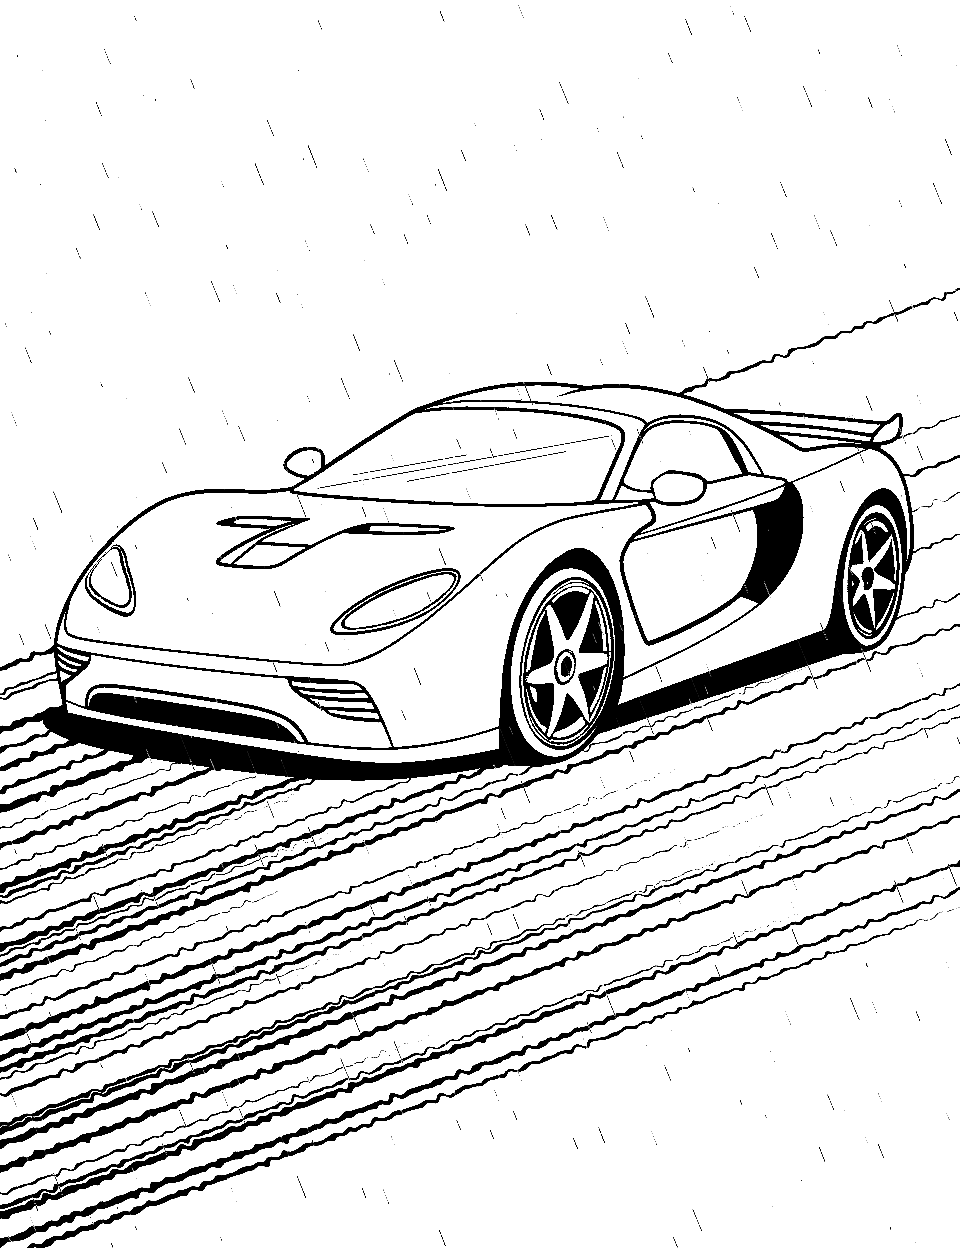 Racing in the Rain Race Car Coloring Page - A race car navigating a wet and slippery track.